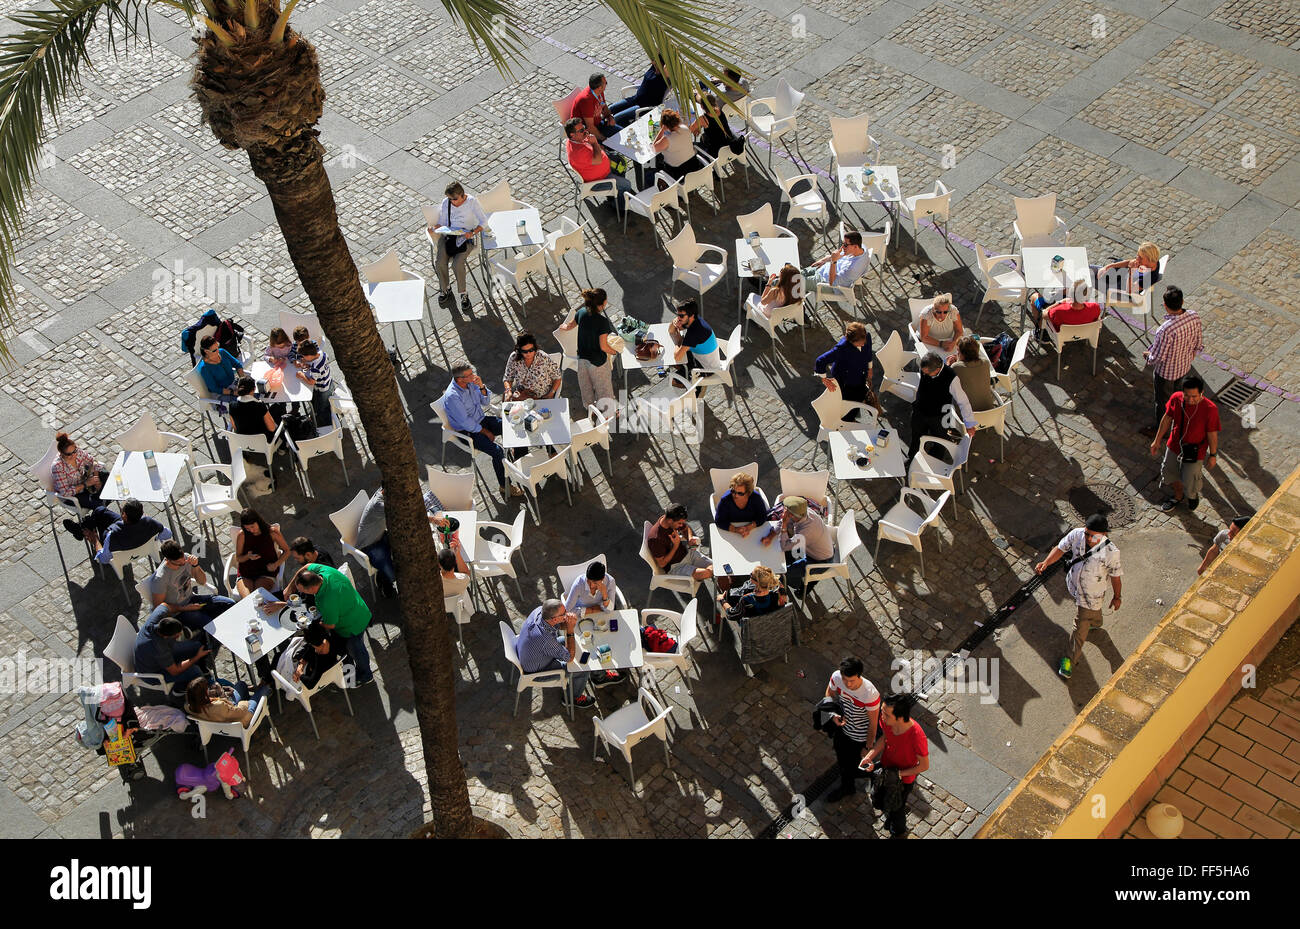 Looking form overhead down on people at restaurant tables in Plaza de la Catedral, Cadiz, Spain Stock Photo